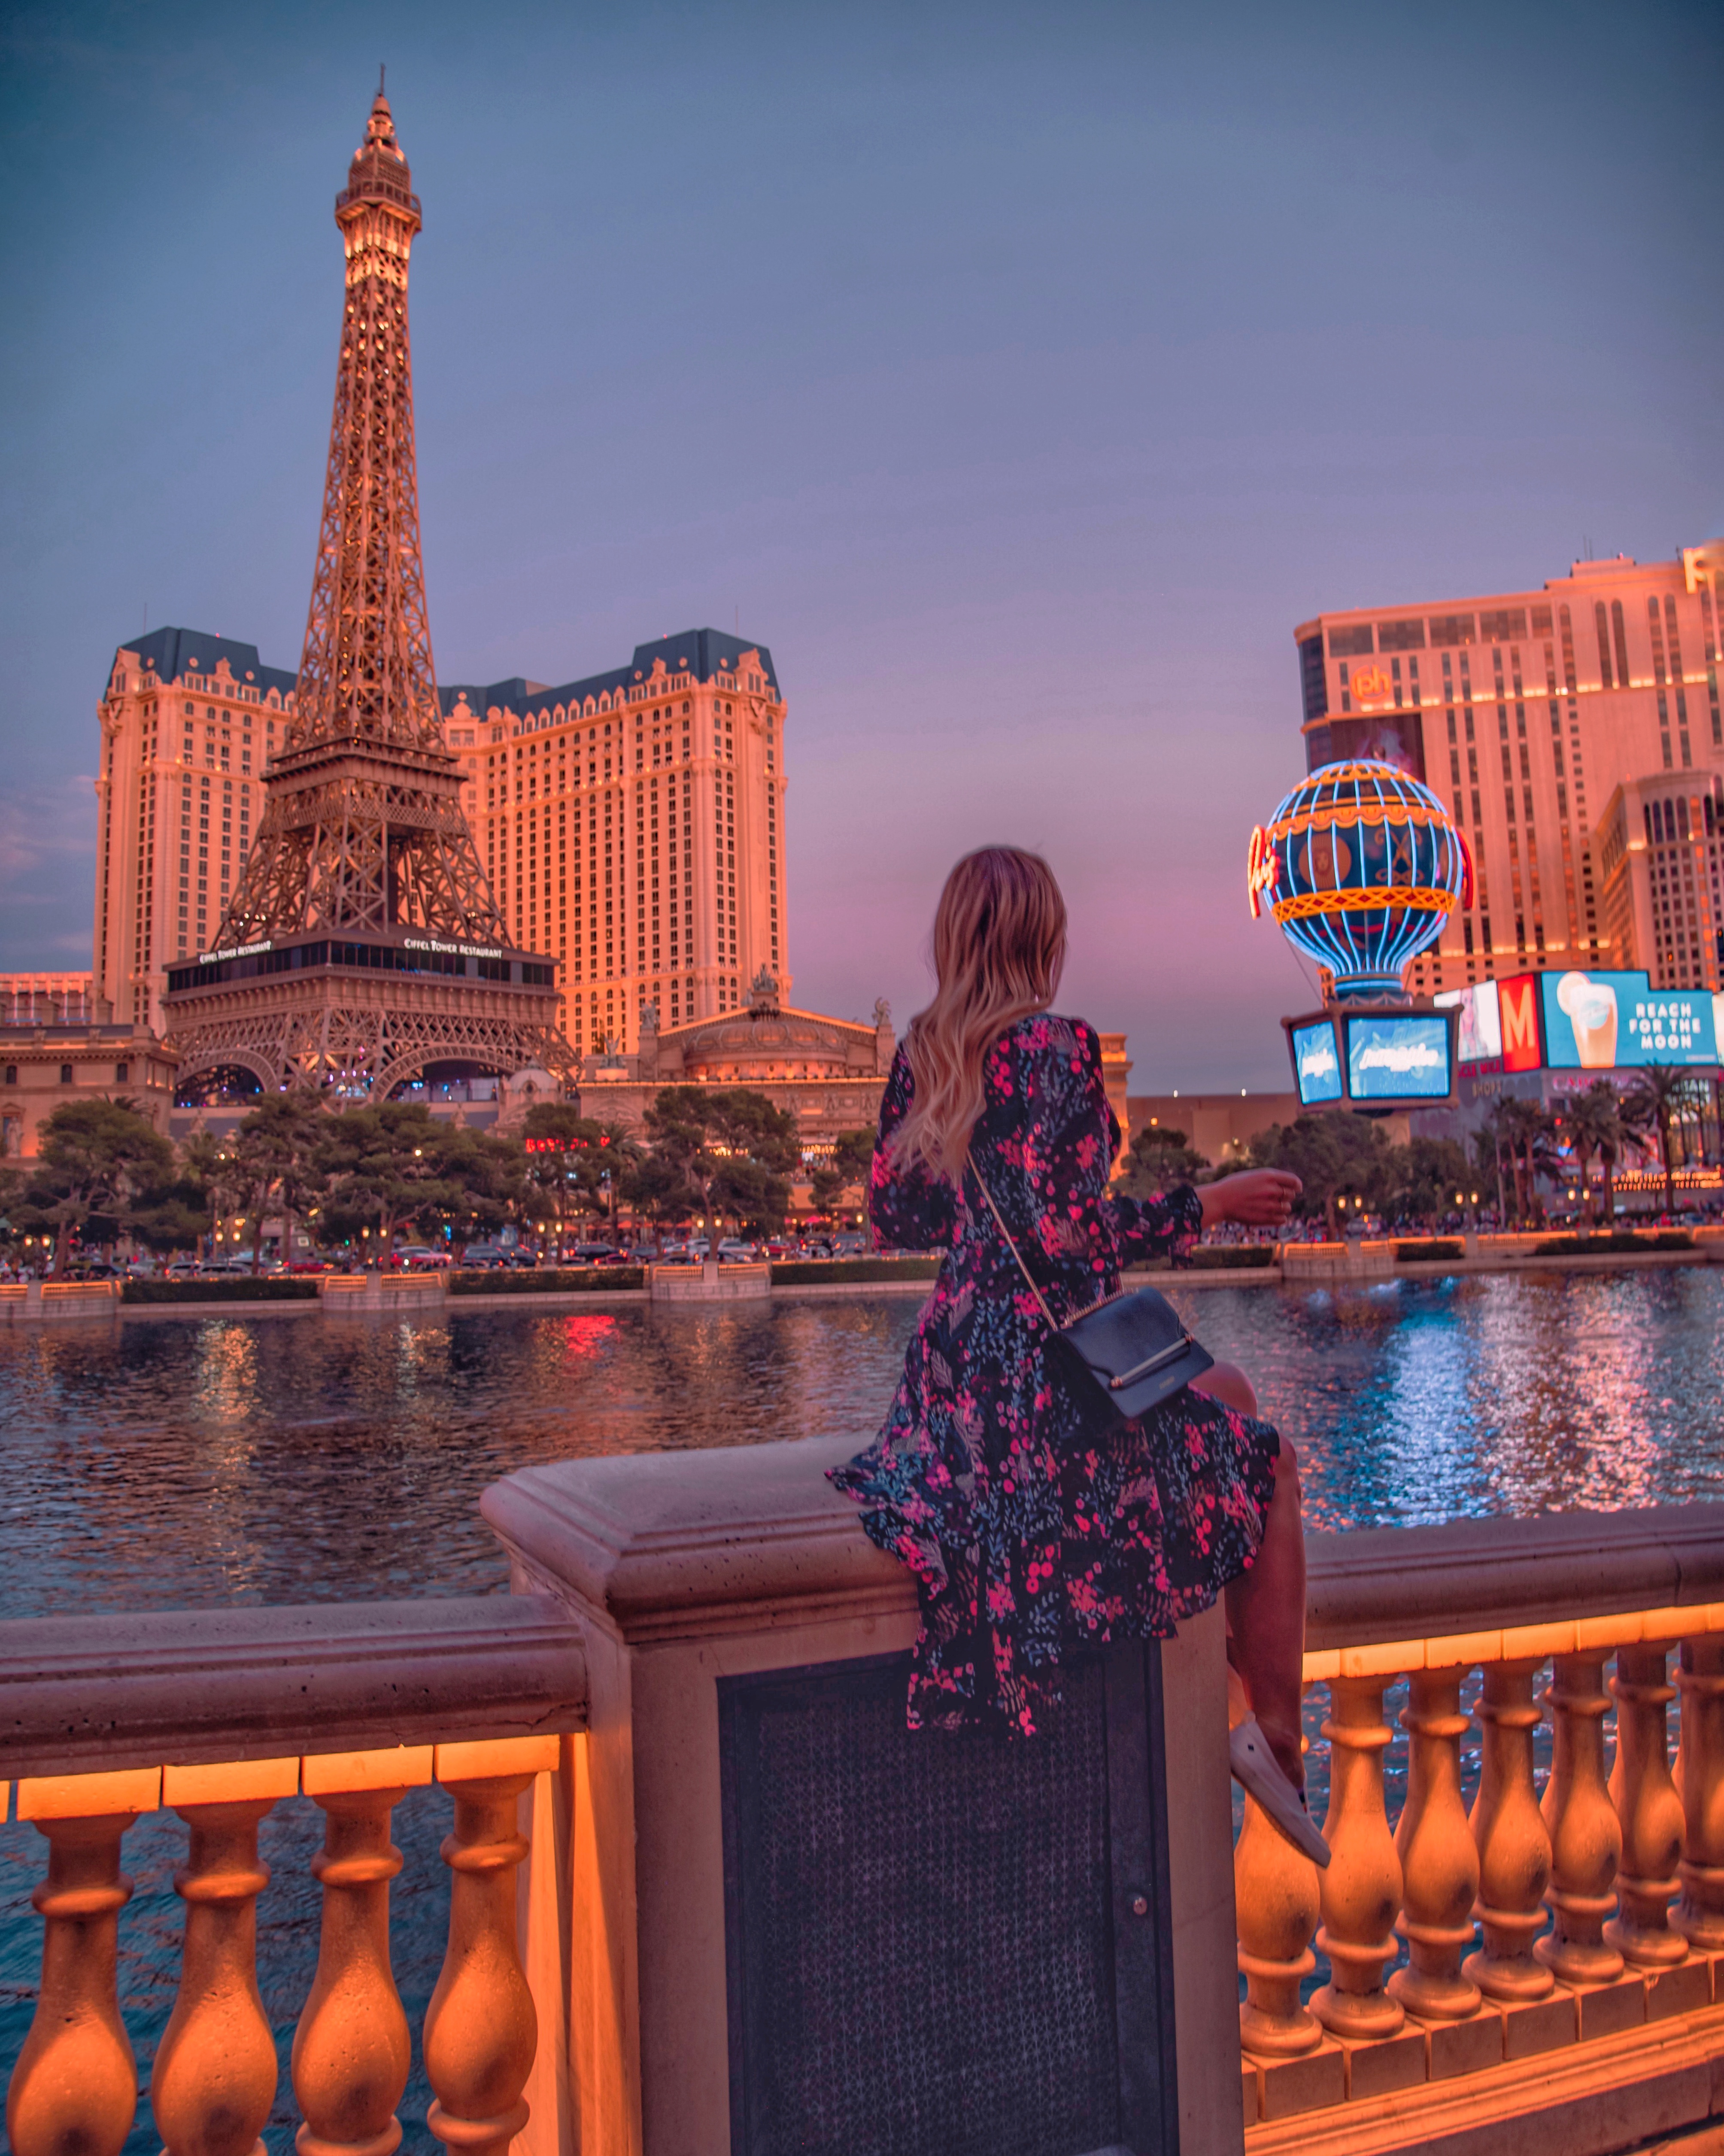 Watch Bellagio fountains from your room! - Picture of Paris Las